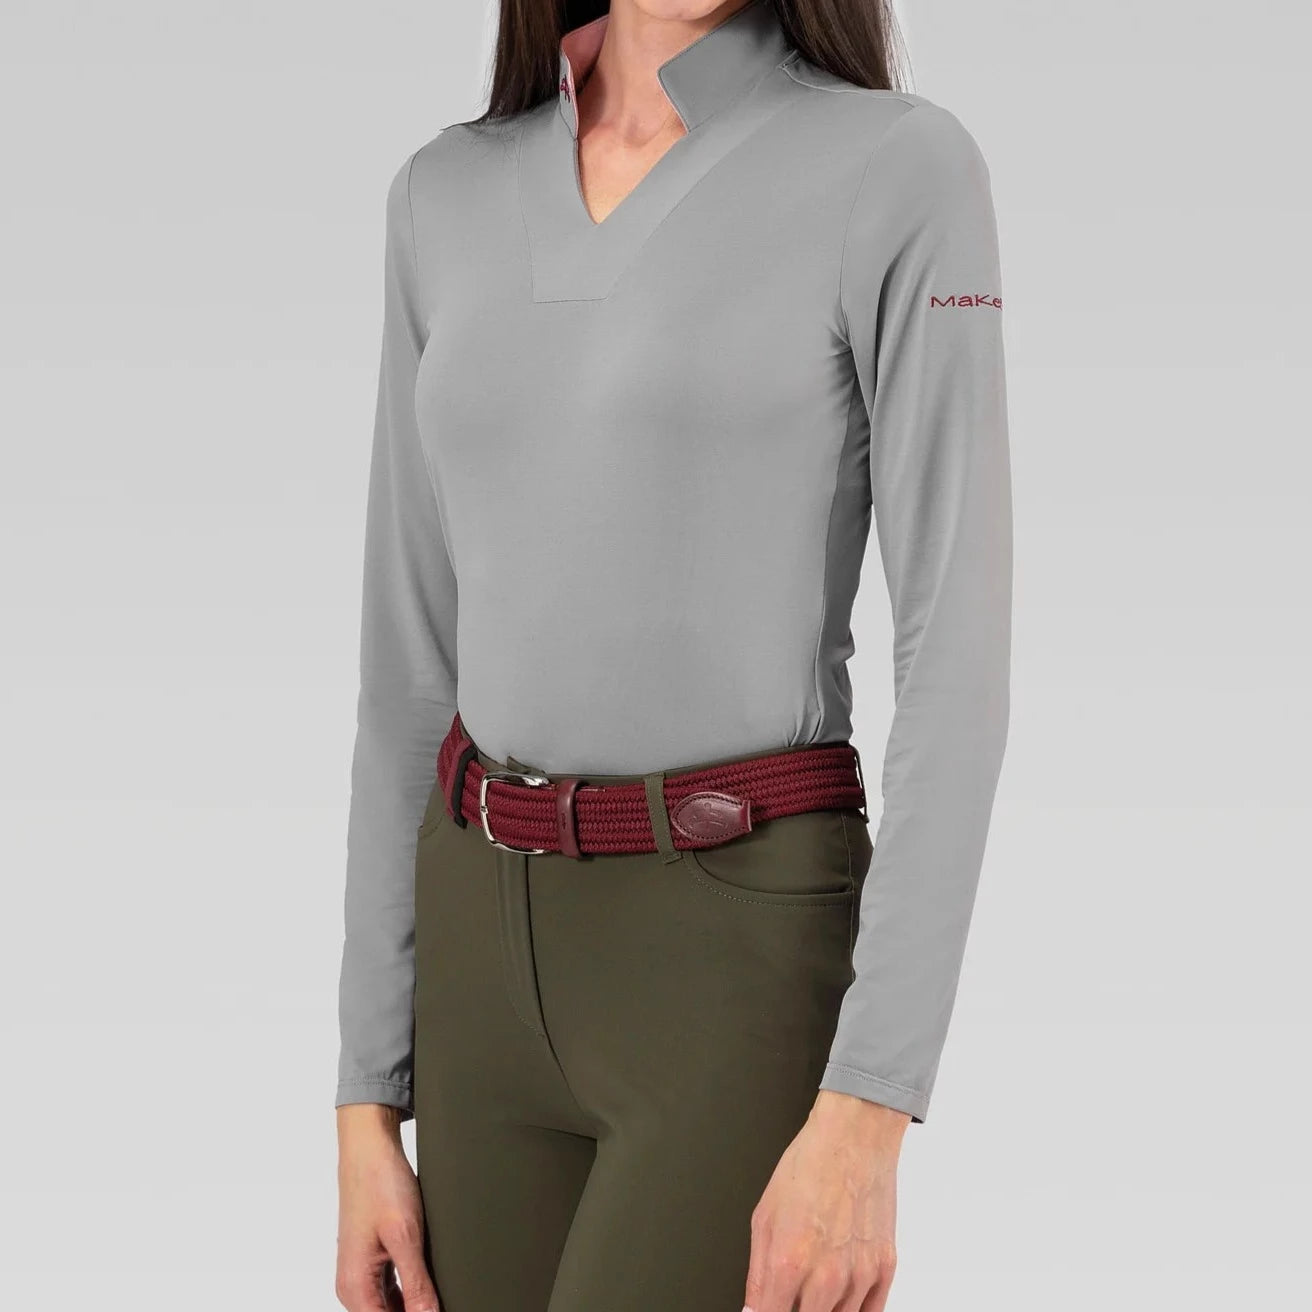 LADIES POLO WITH LONGS SLEEVES WENDY.